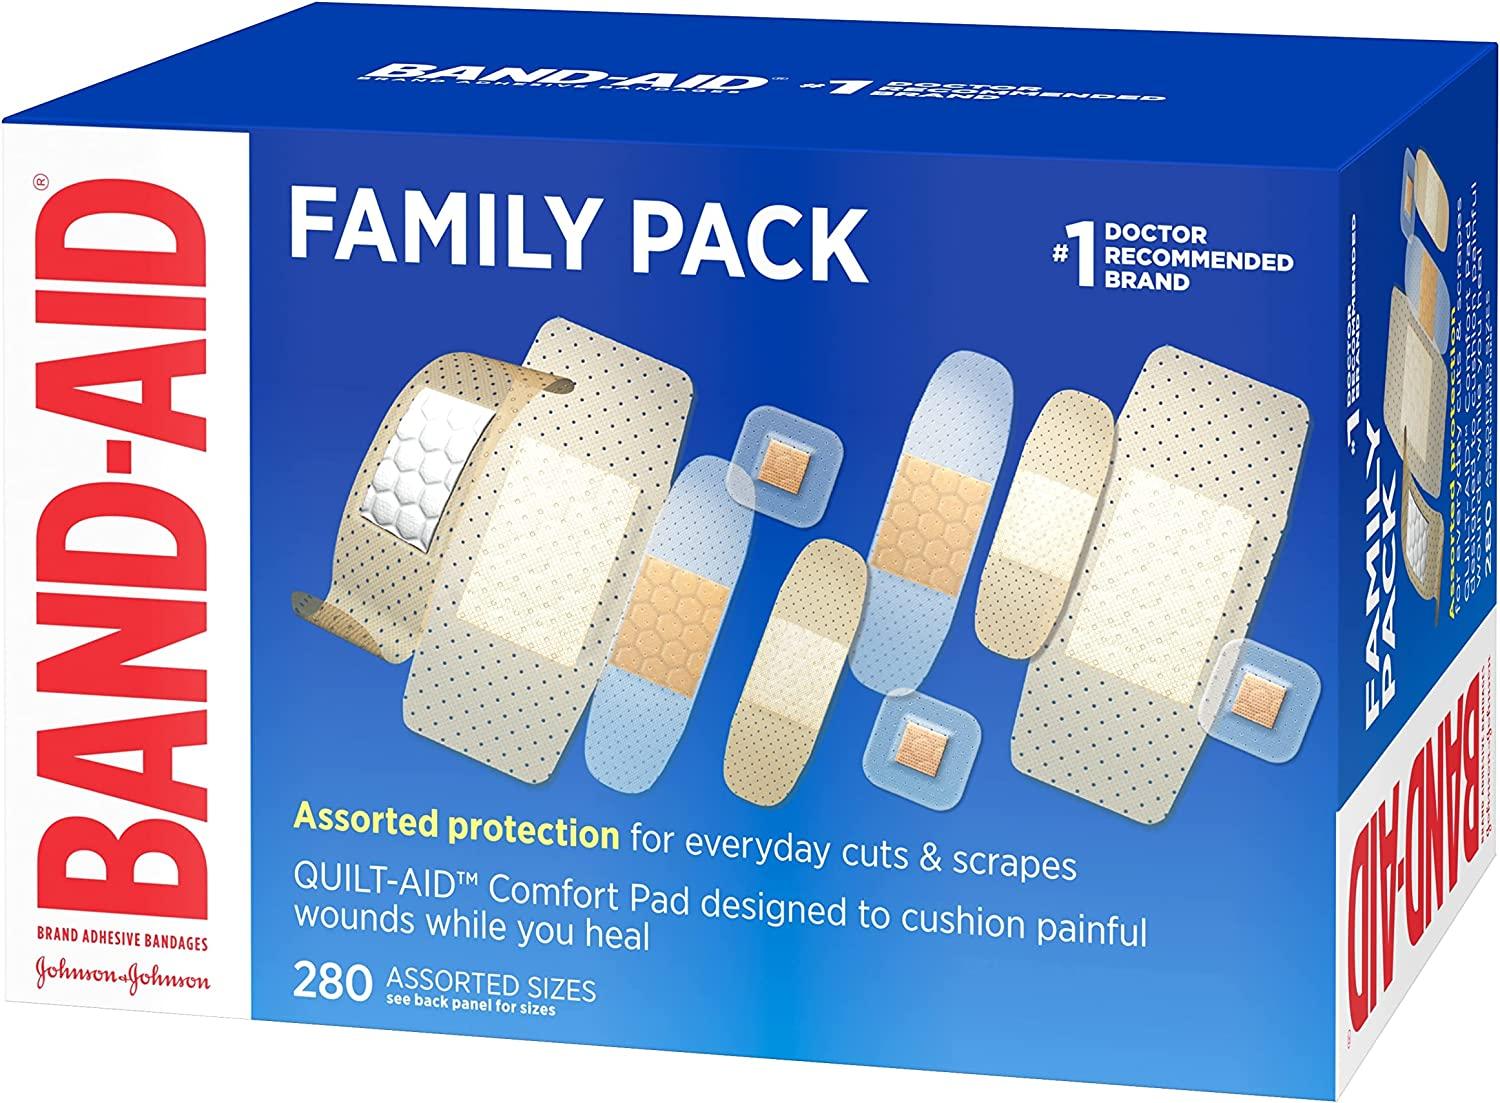 HSA Eligible  Band-Aid Family Pack Adhesive Bandages, 110 ct